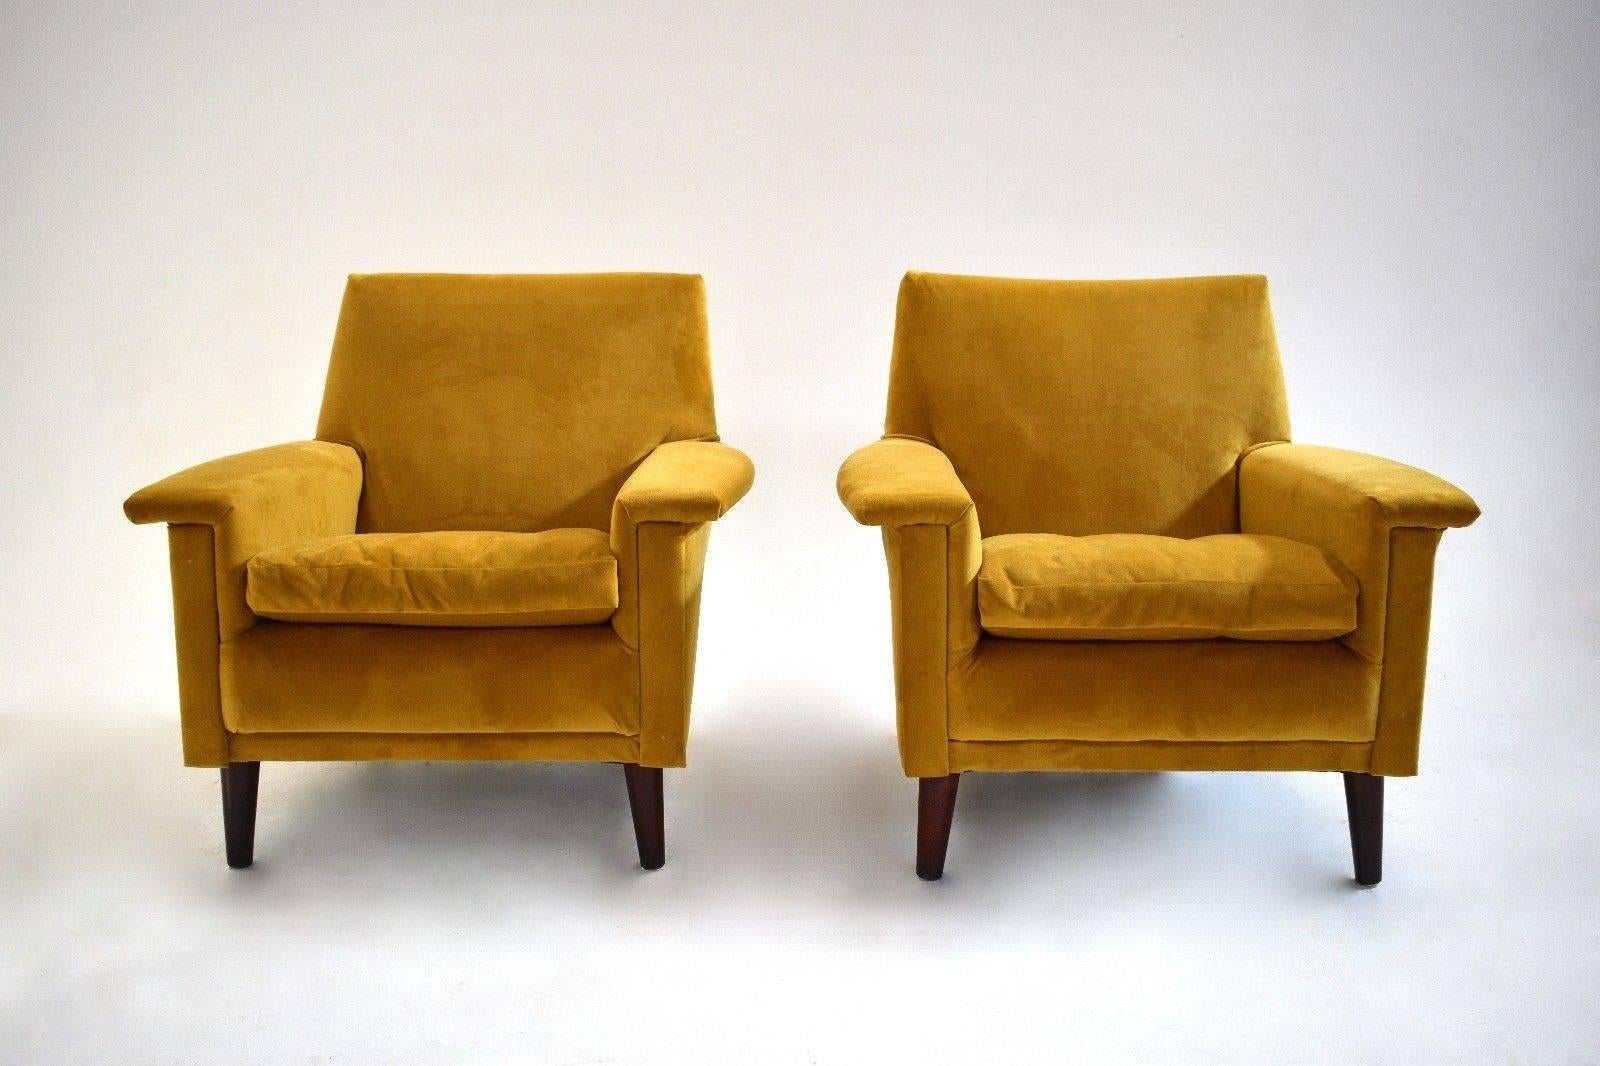 A beautiful British gold velvet armchair, this would make a stylish addition to any living or work area. 

The chair has a wide seat and padded armrests for enhanced comfort. A striking piece of classic midcentury furniture.

The chair is in